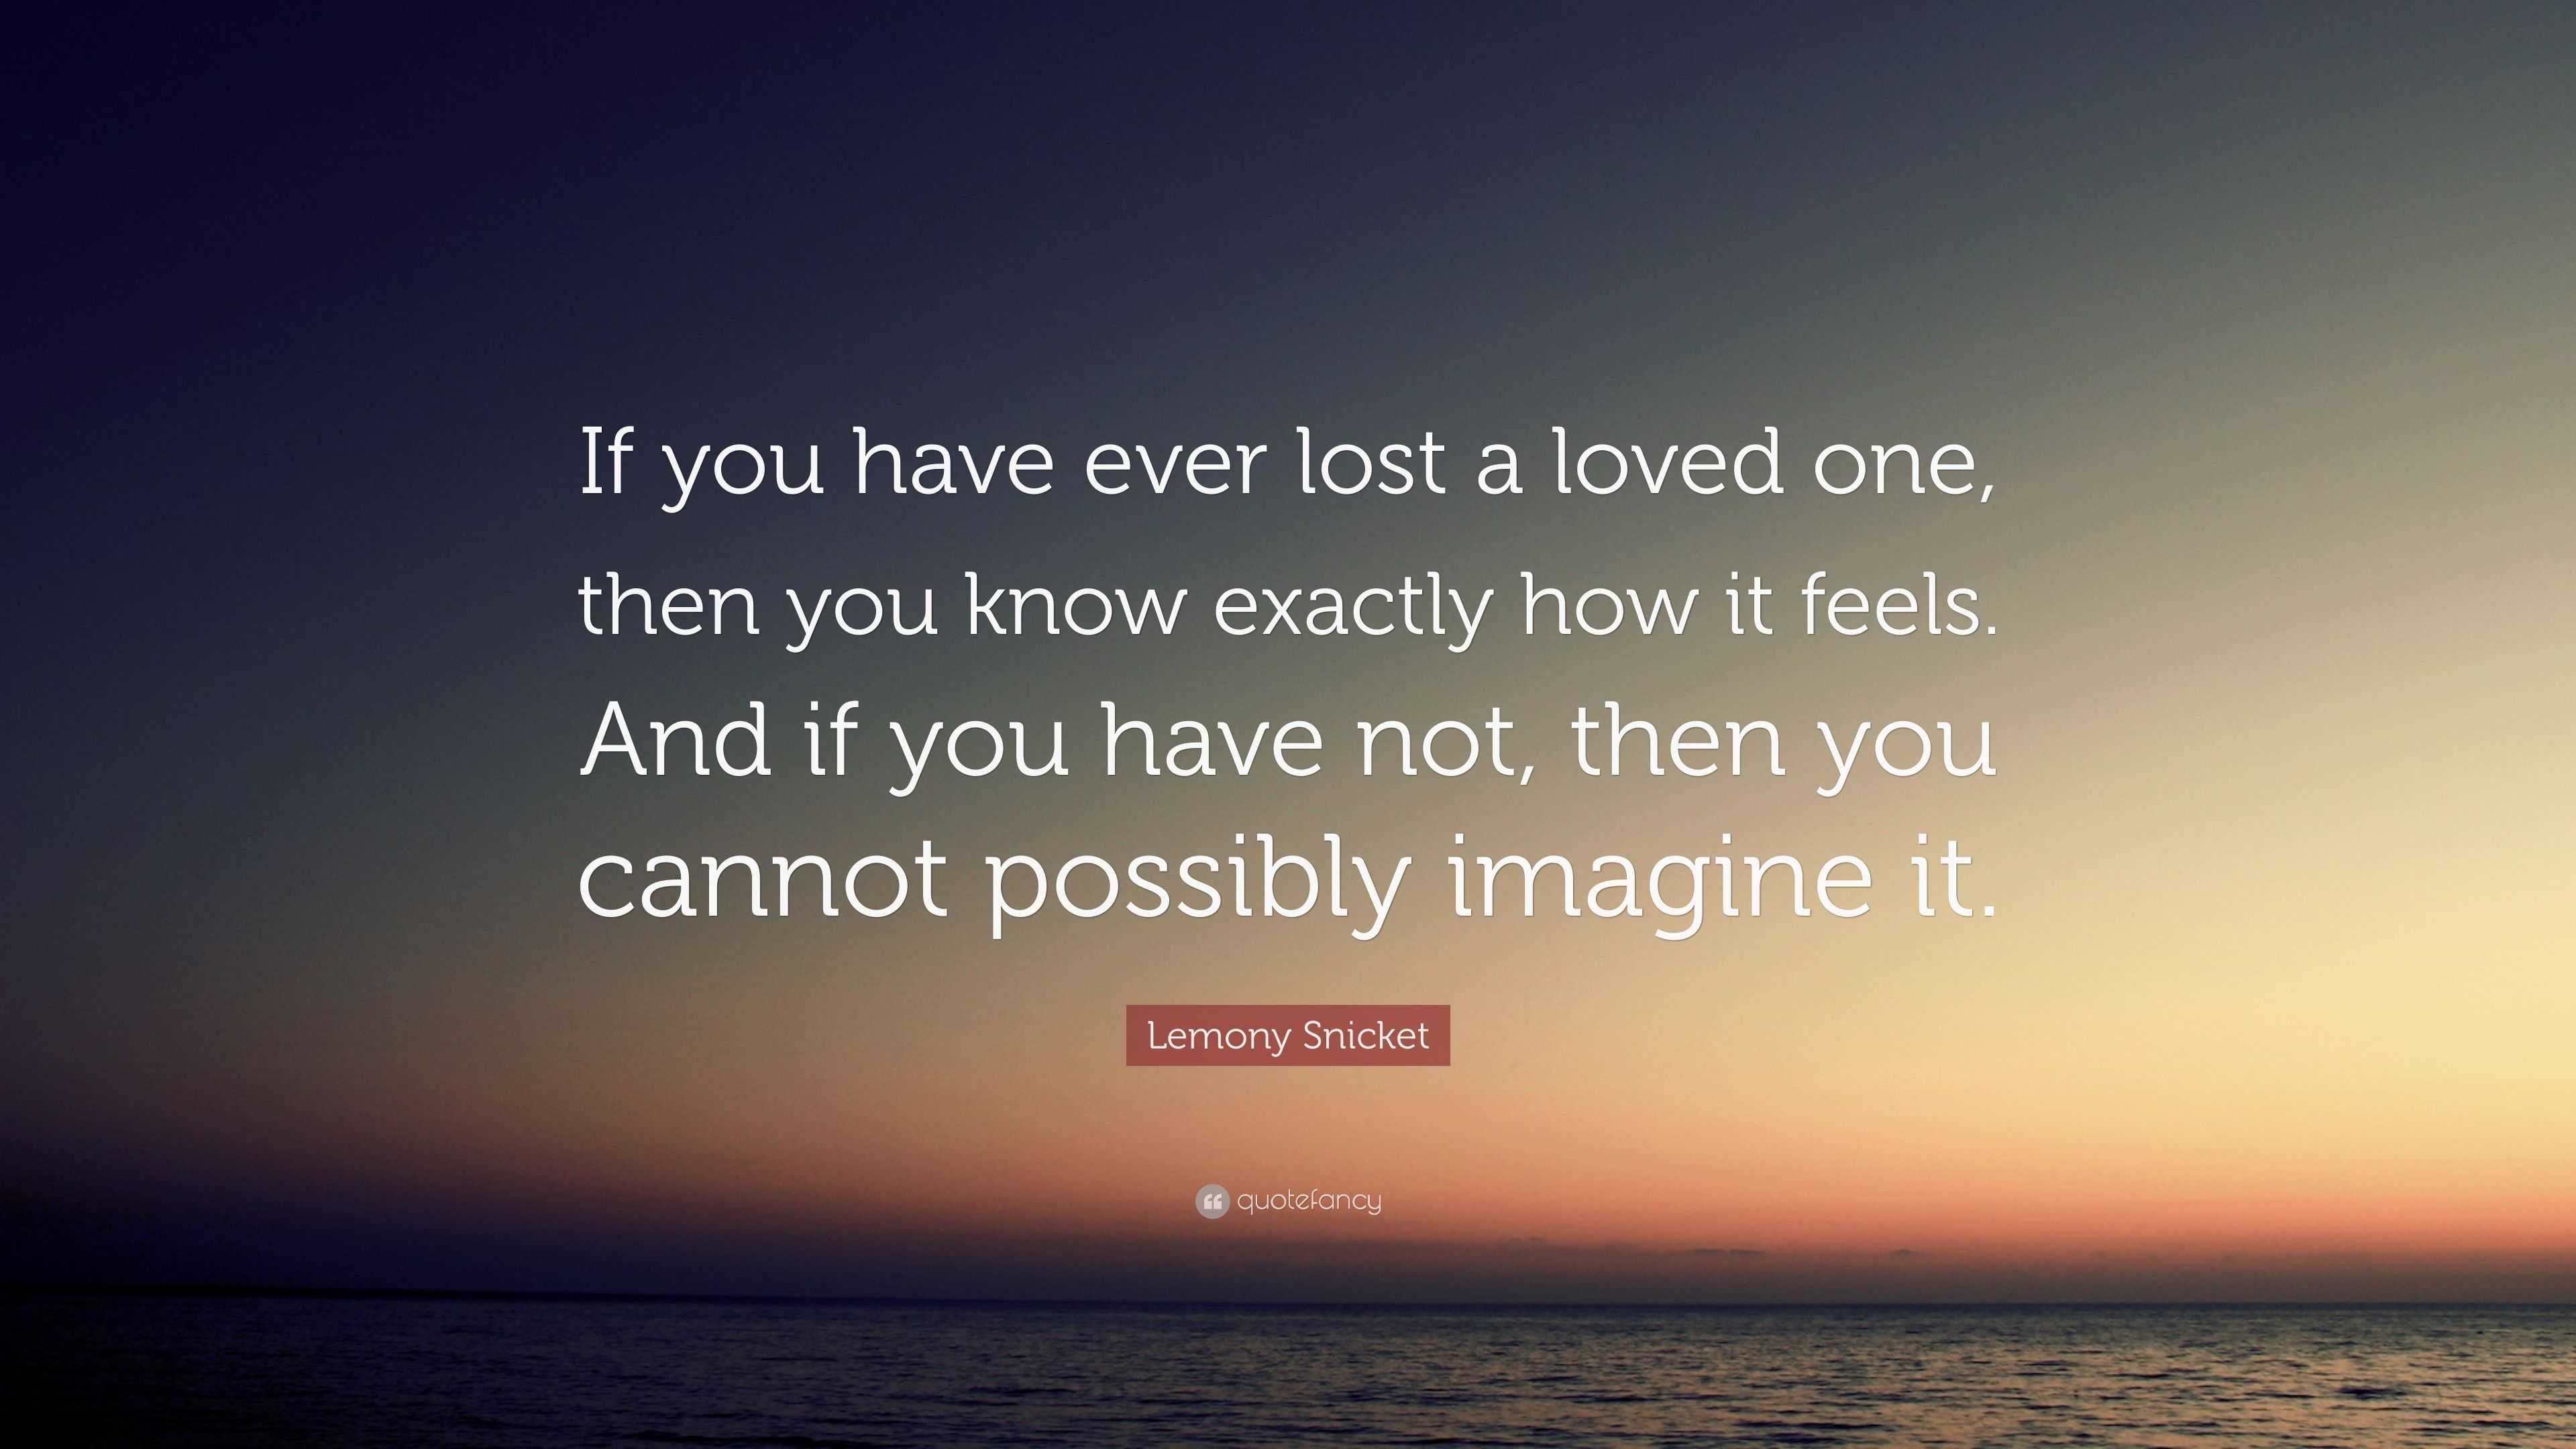 Lemony Snicket Quote “If you have ever lost a loved one then you